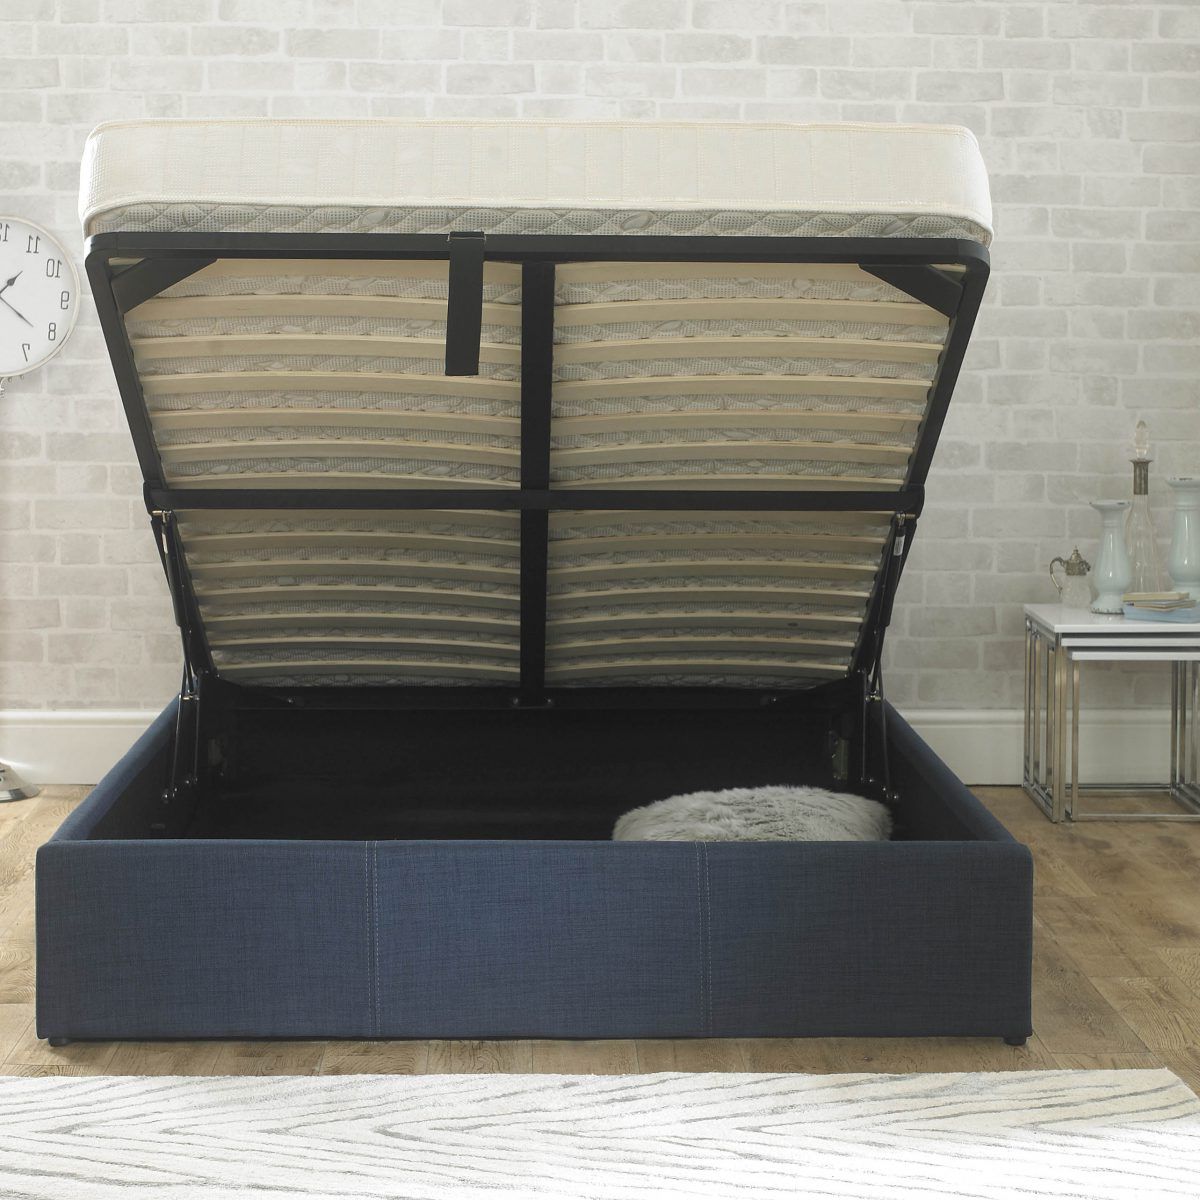 Most Recently Released Charcoal And Camel Basket Weave Pouf Ottomans Pertaining To Stirling Fabric Ottoman Bed Charcoal – Haven Furniture (View 5 of 10)